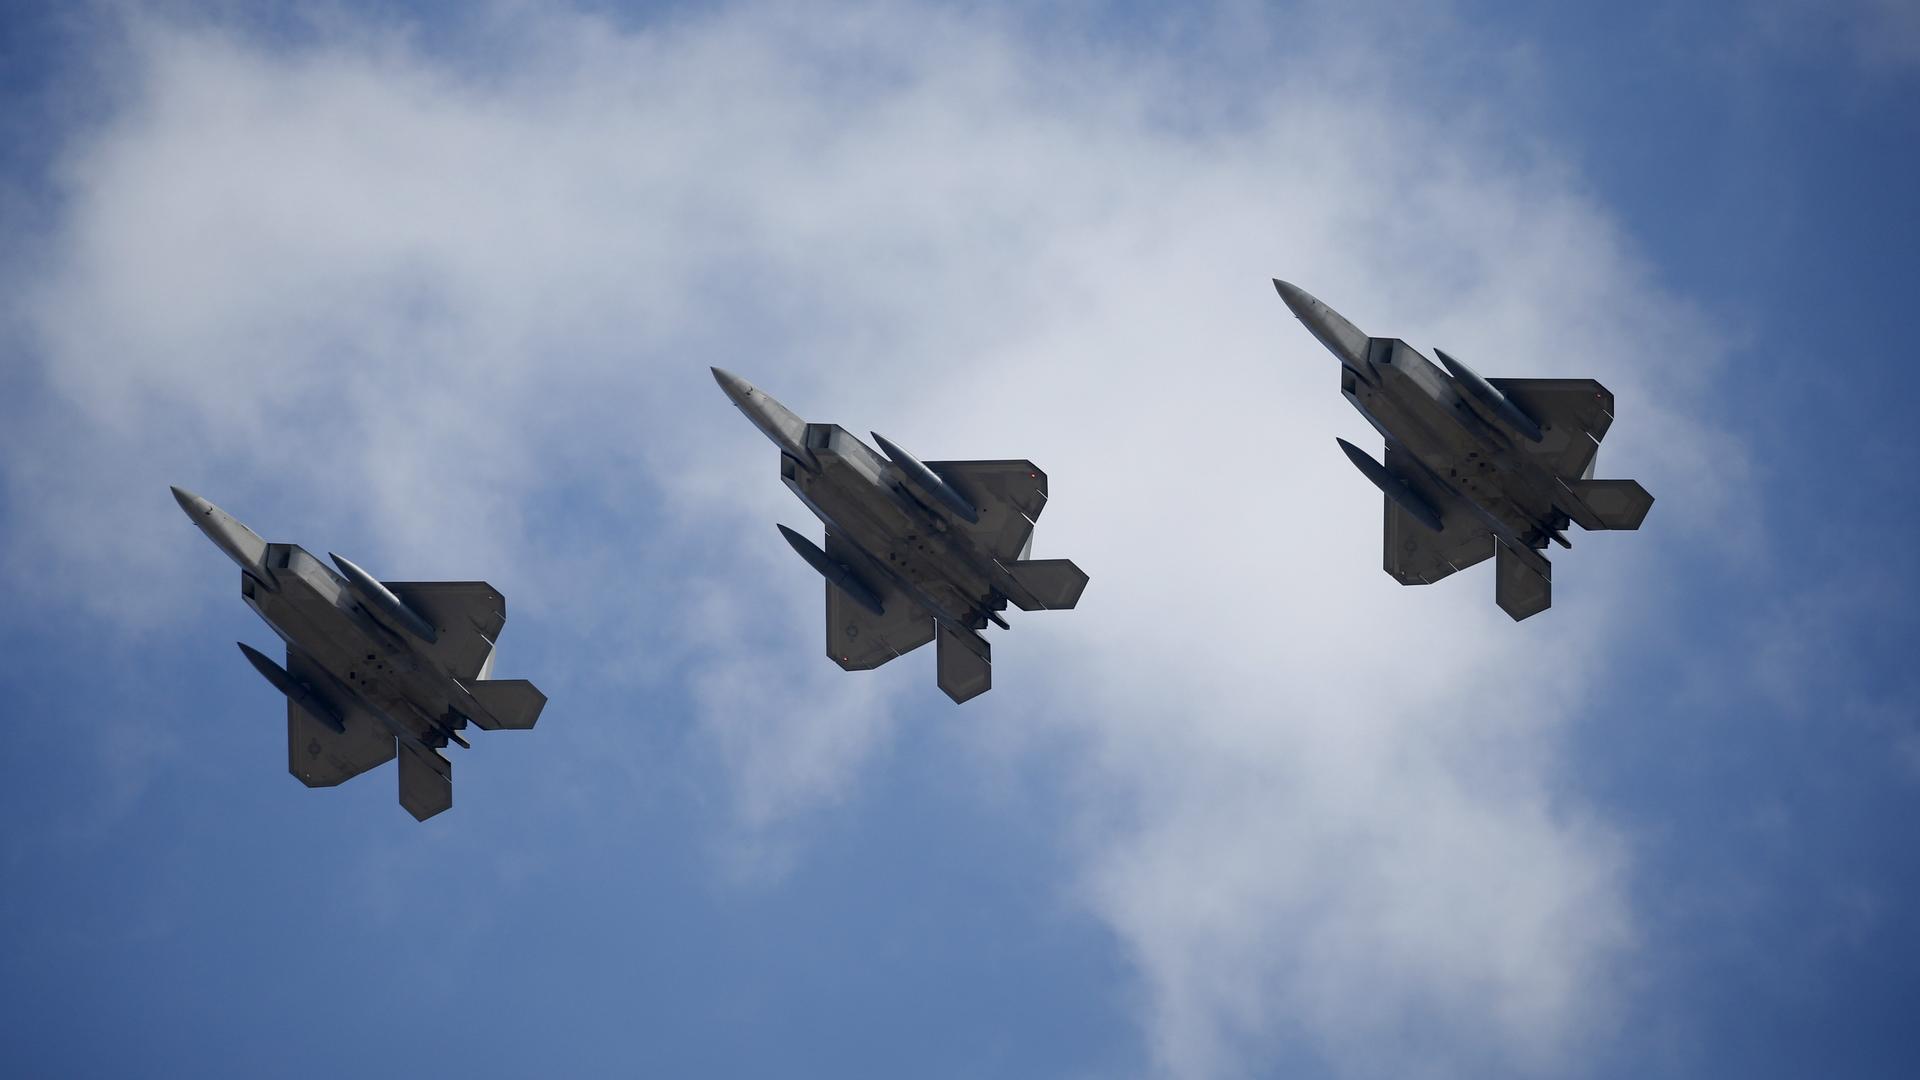 US F-22 stealth fighter jets fly over Osan Air Base in Pyeongtaek, South Korea, Feb. 17, 2016.